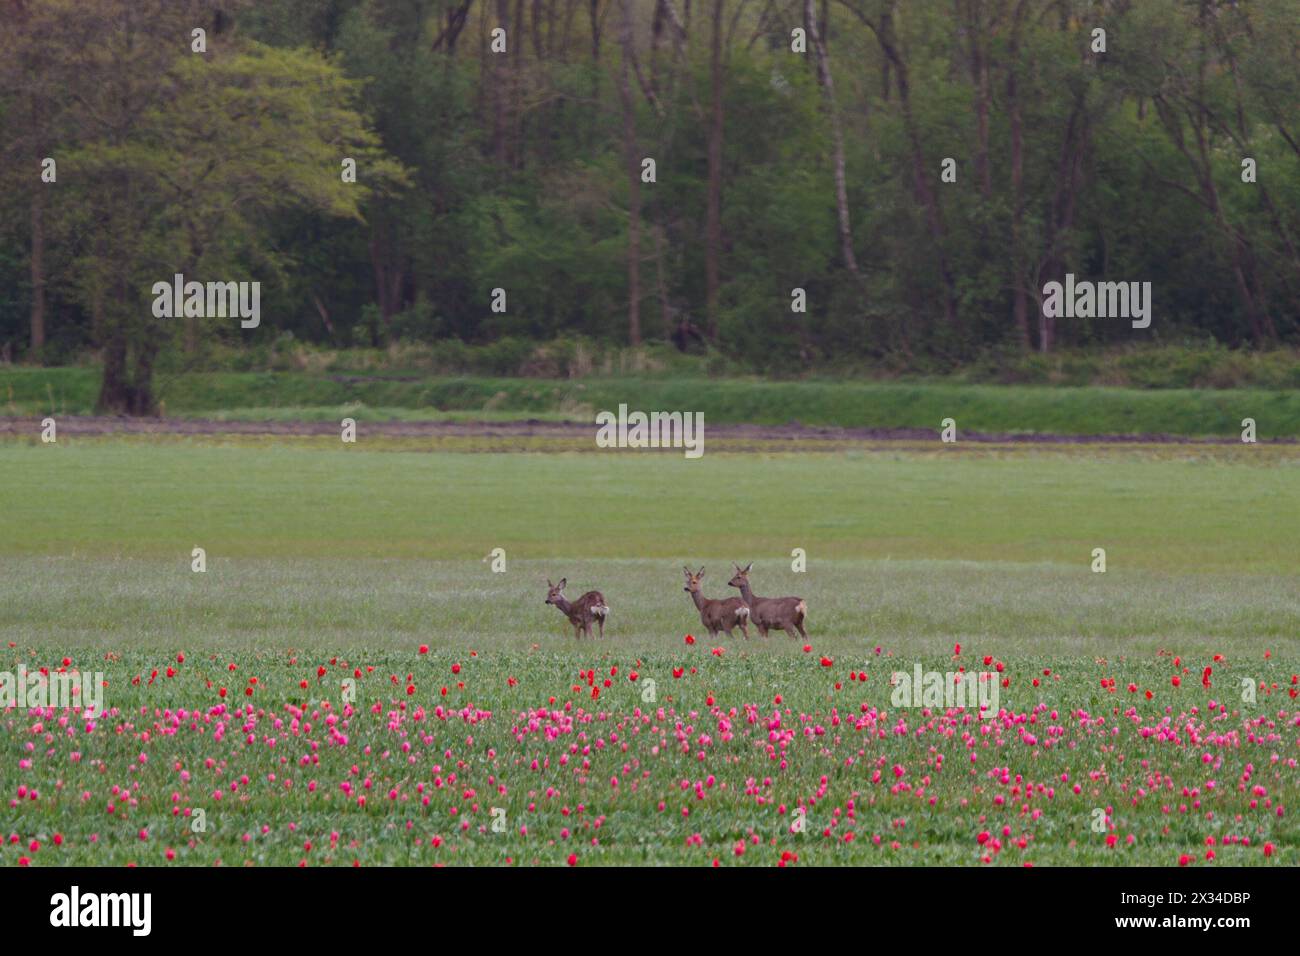 Three deer at the edge of a tulip field Stock Photo